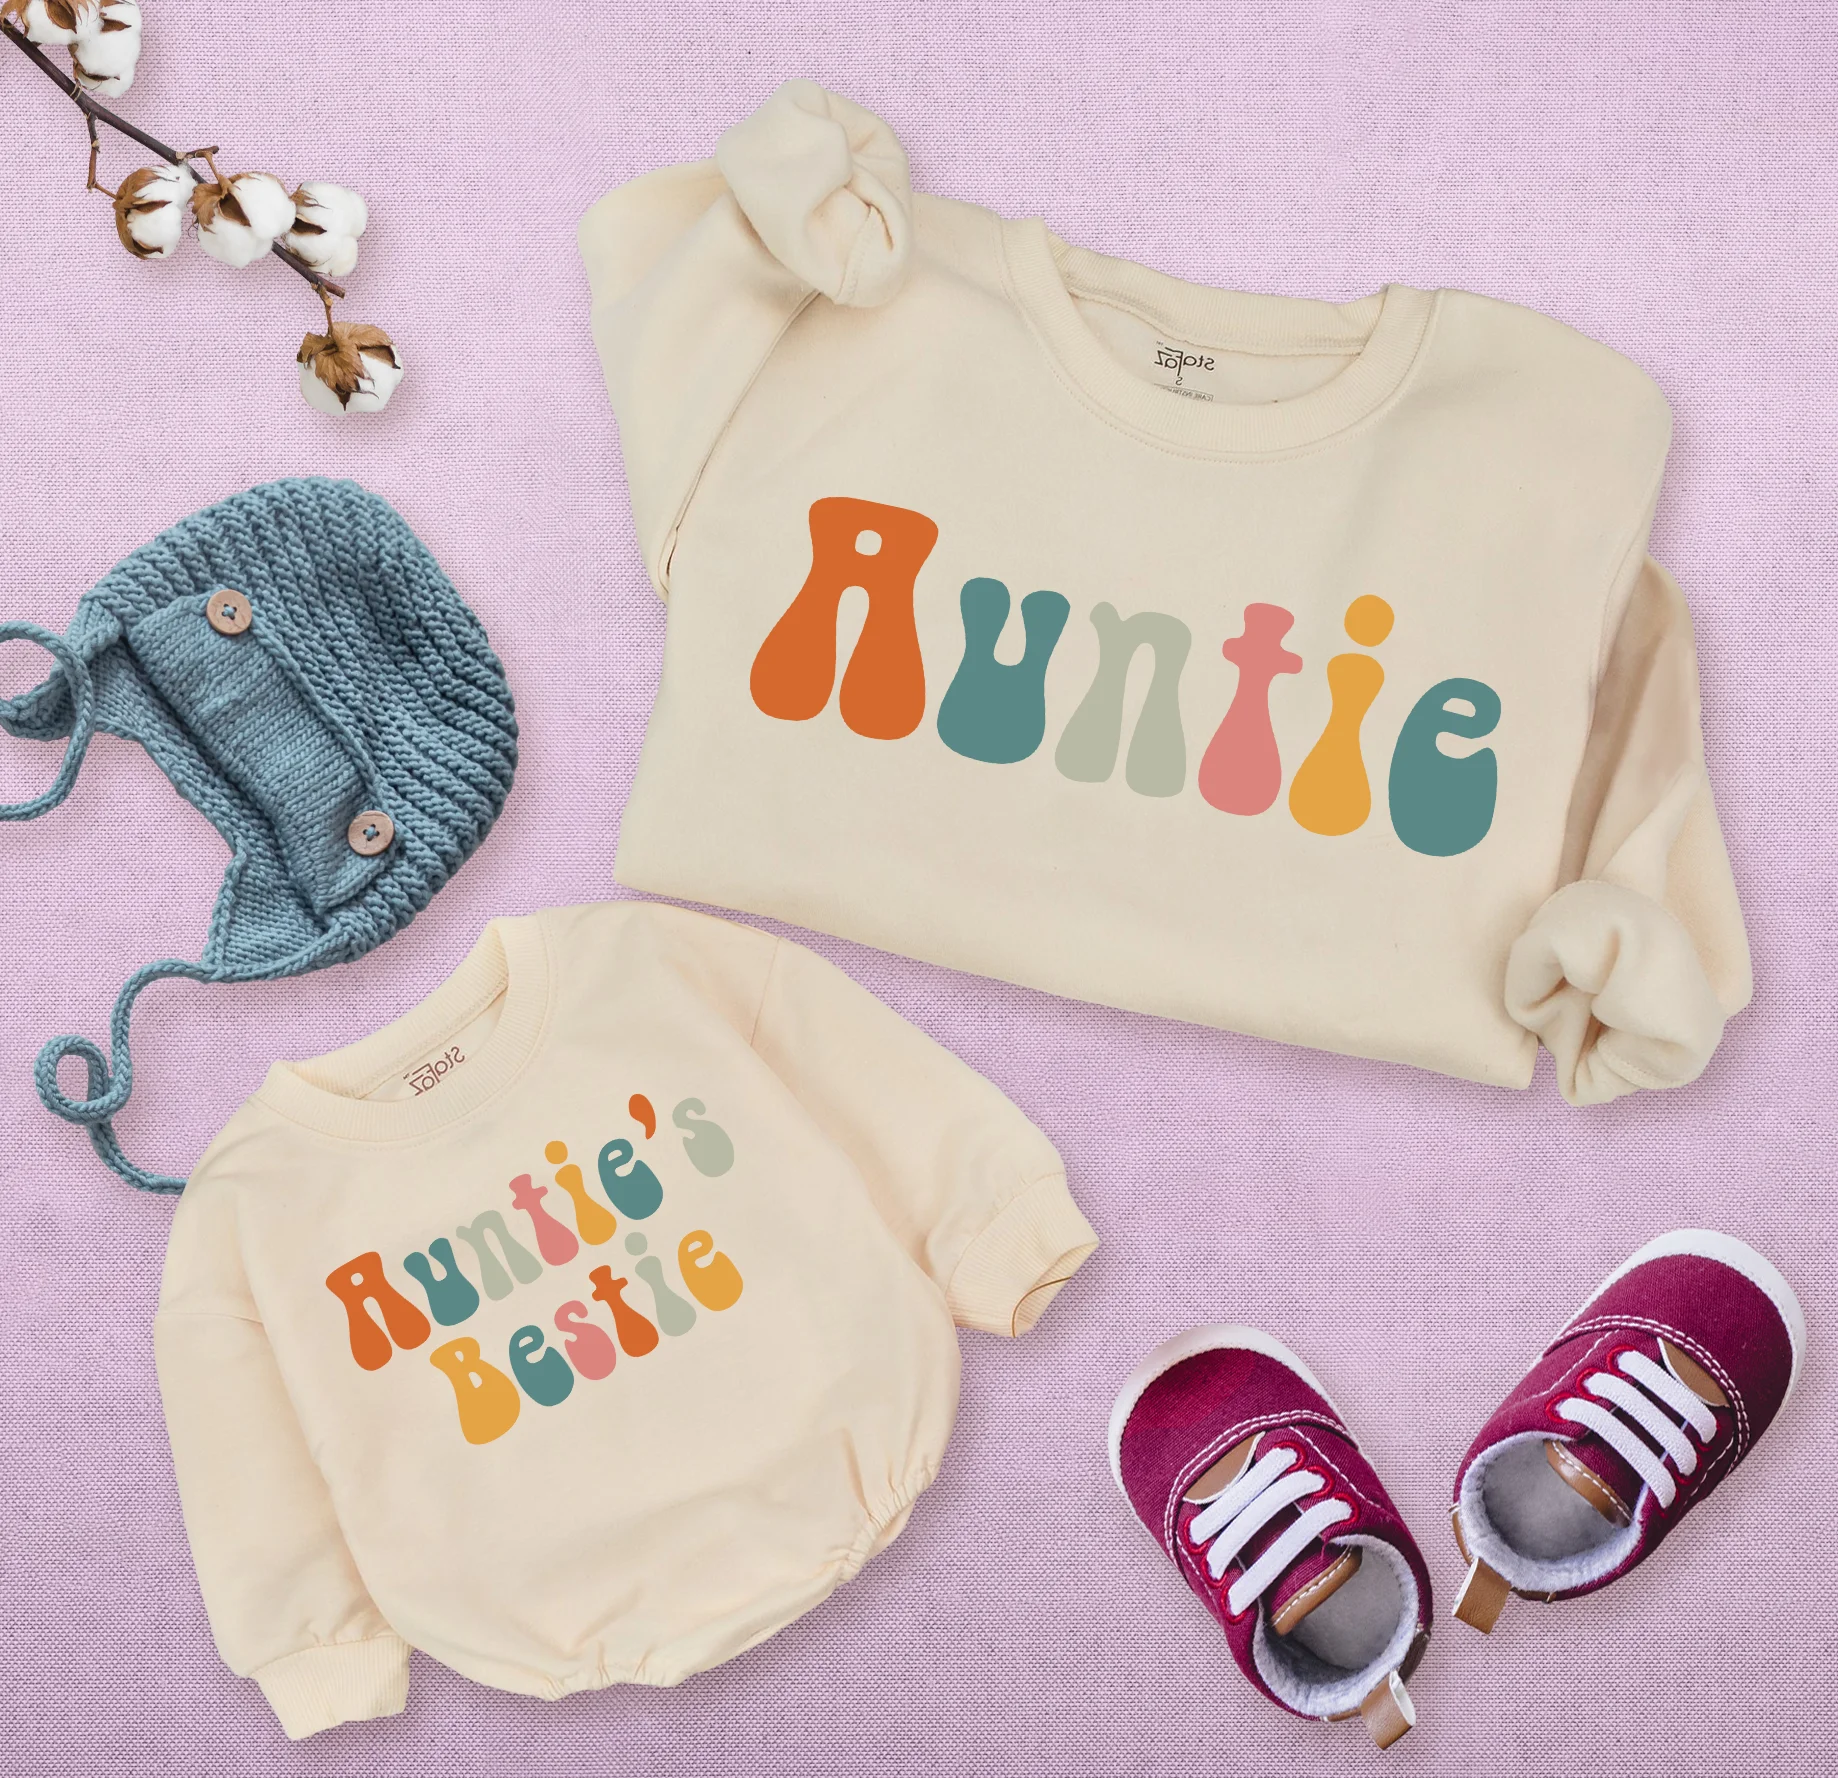 Auntie's Bestie Romper Matching: Personalized Family Set